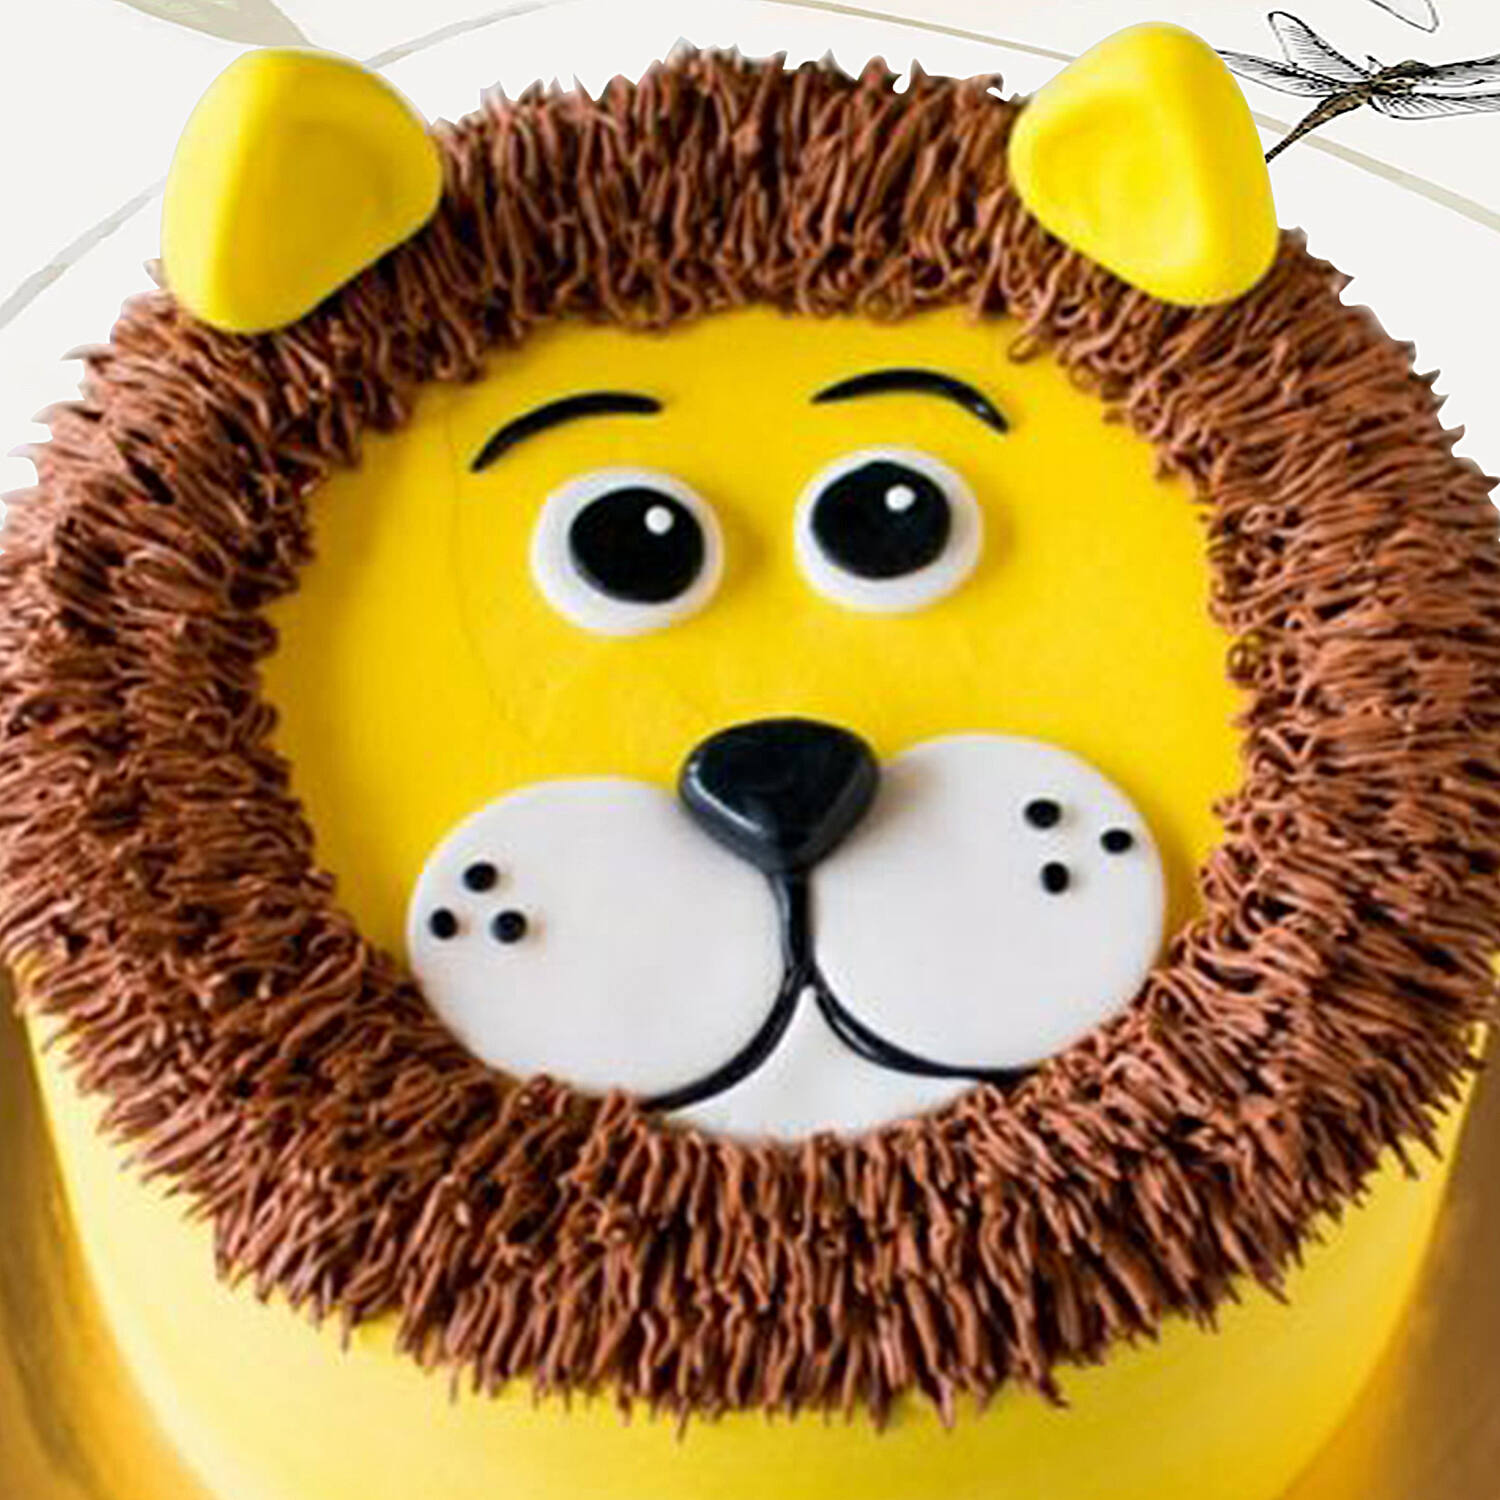 Whimsical Jungle-Animal Theme Cakes | Dial A Cake | Cake Delivery in Delhi  NCR